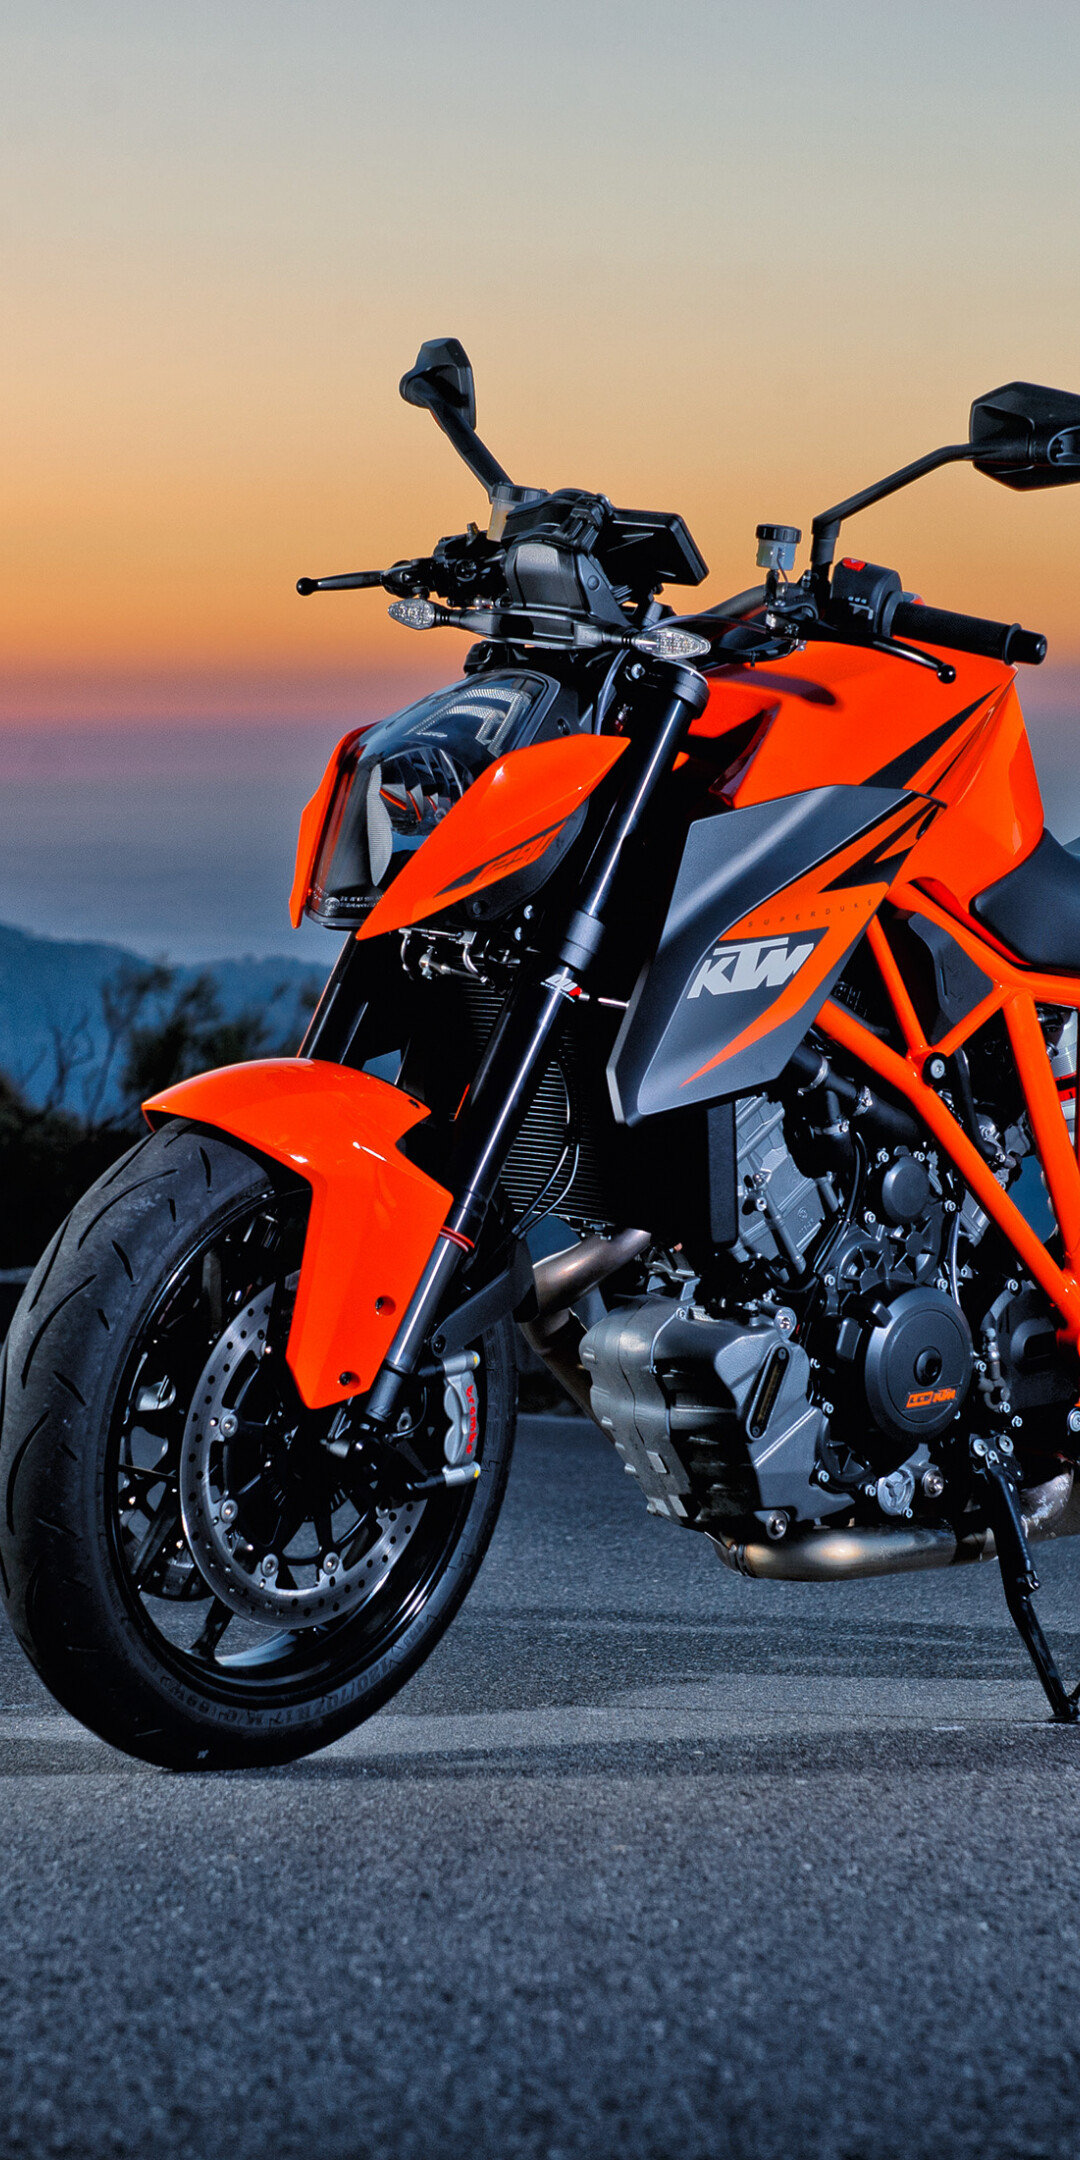 Bike: KTM Duke, The company, known for its off-road motorcycles. 1080x2160 HD Wallpaper.